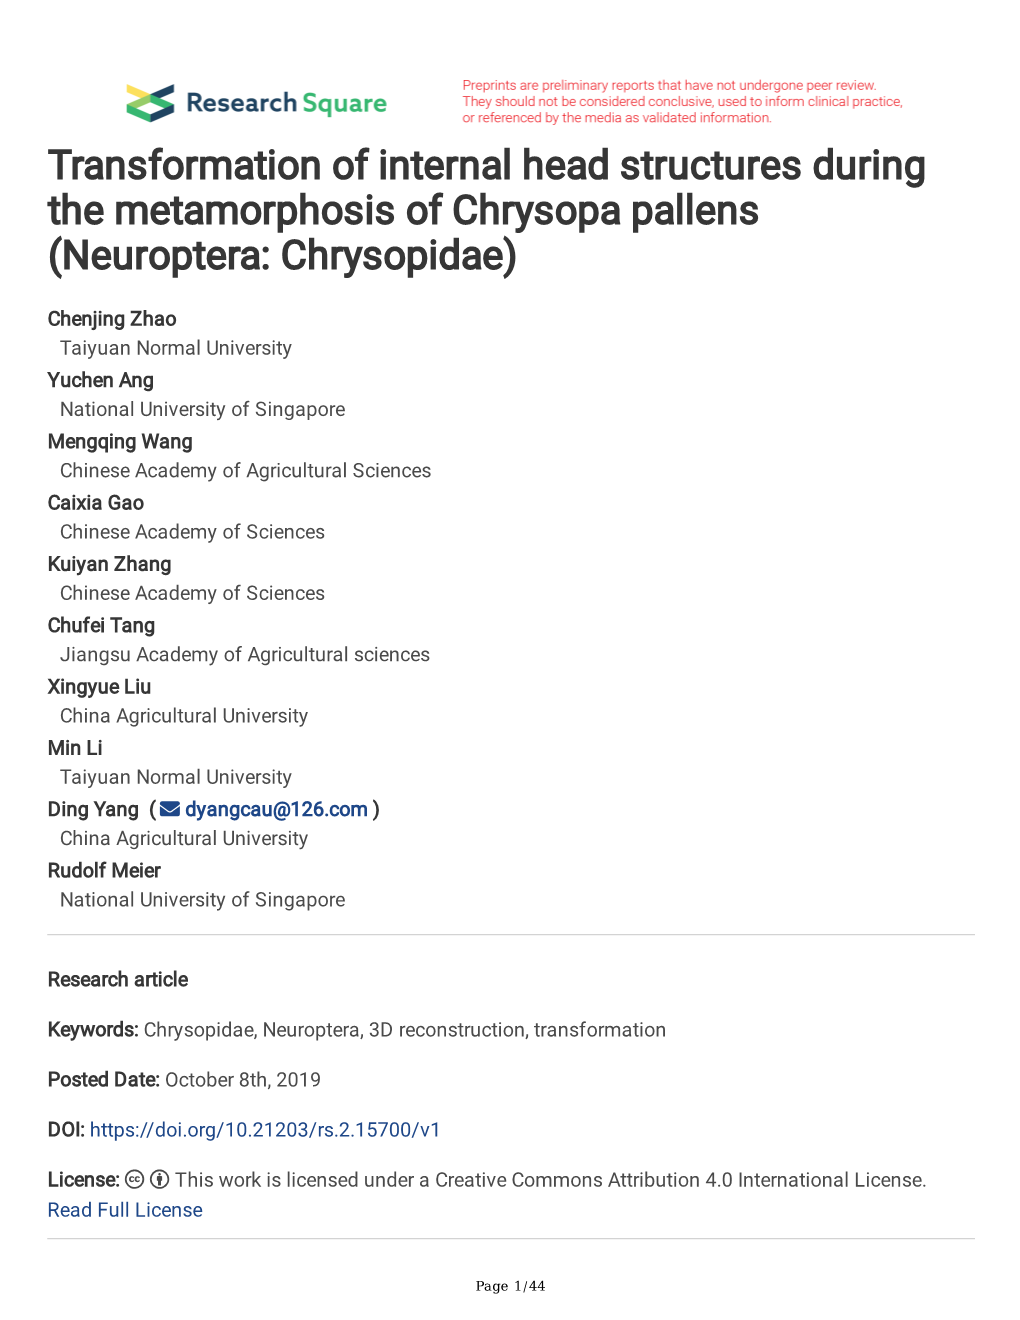 Transformation of Internal Head Structures During the Metamorphosis of Chrysopa Pallens (Neuroptera: Chrysopidae)